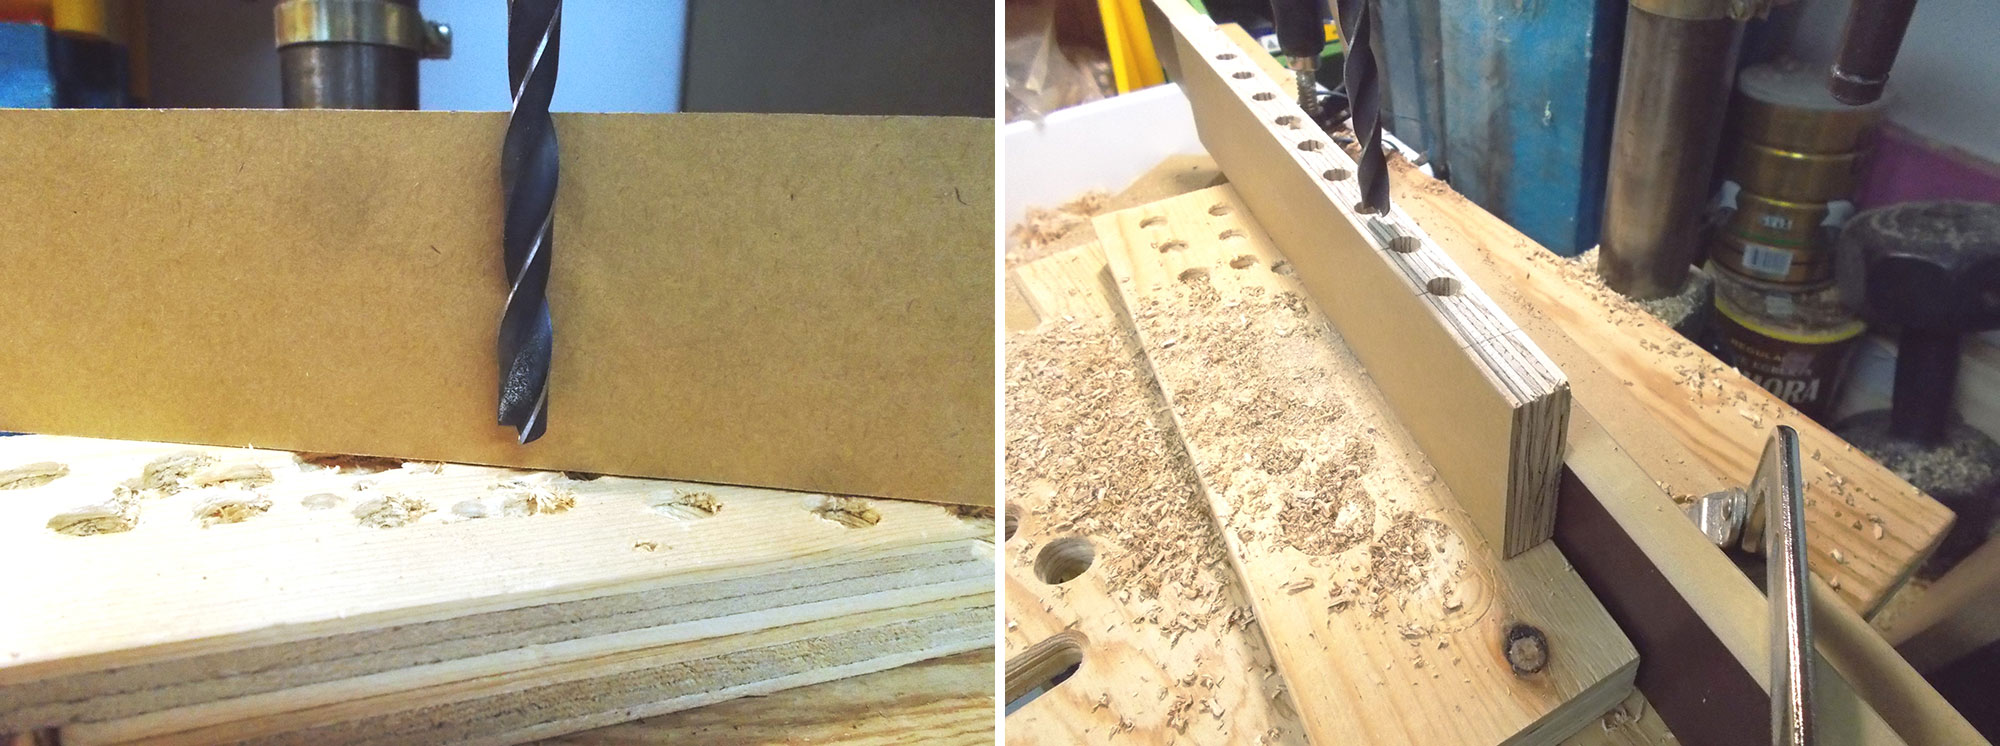 Image left: Drill stopped holes on wider rails. Image right: Using an L-shaped fence.